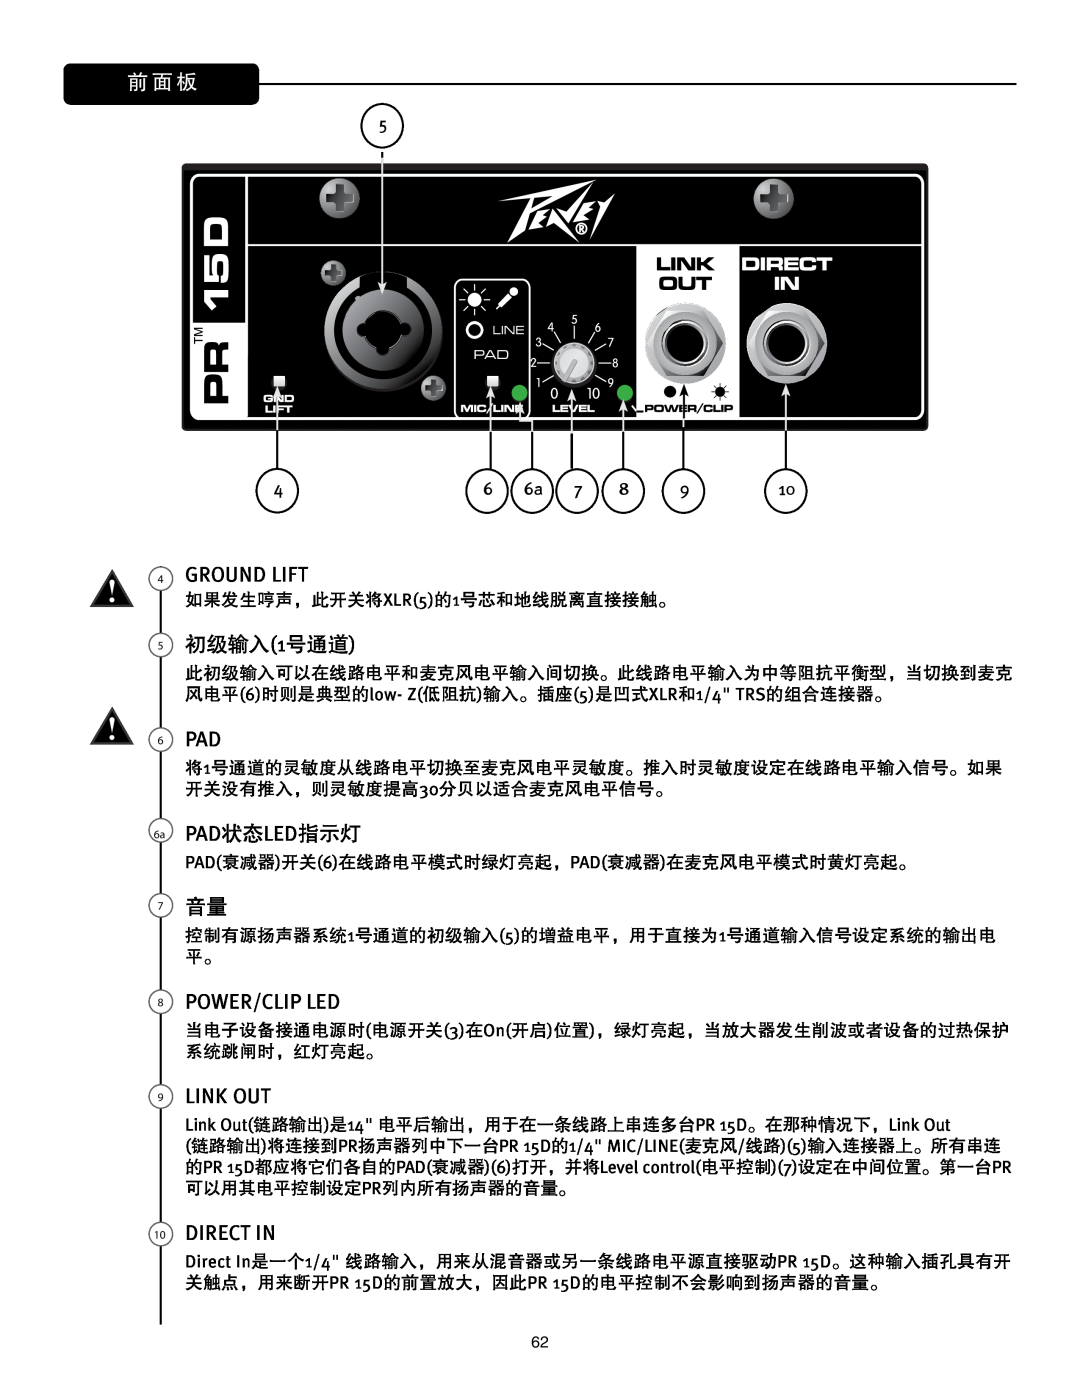 Peavey PR 15 D manual 初级输入1号通道, Pad状态led指示灯, Link Out, Ground Lift, Power/Clip Led, 10DIRECT IN 